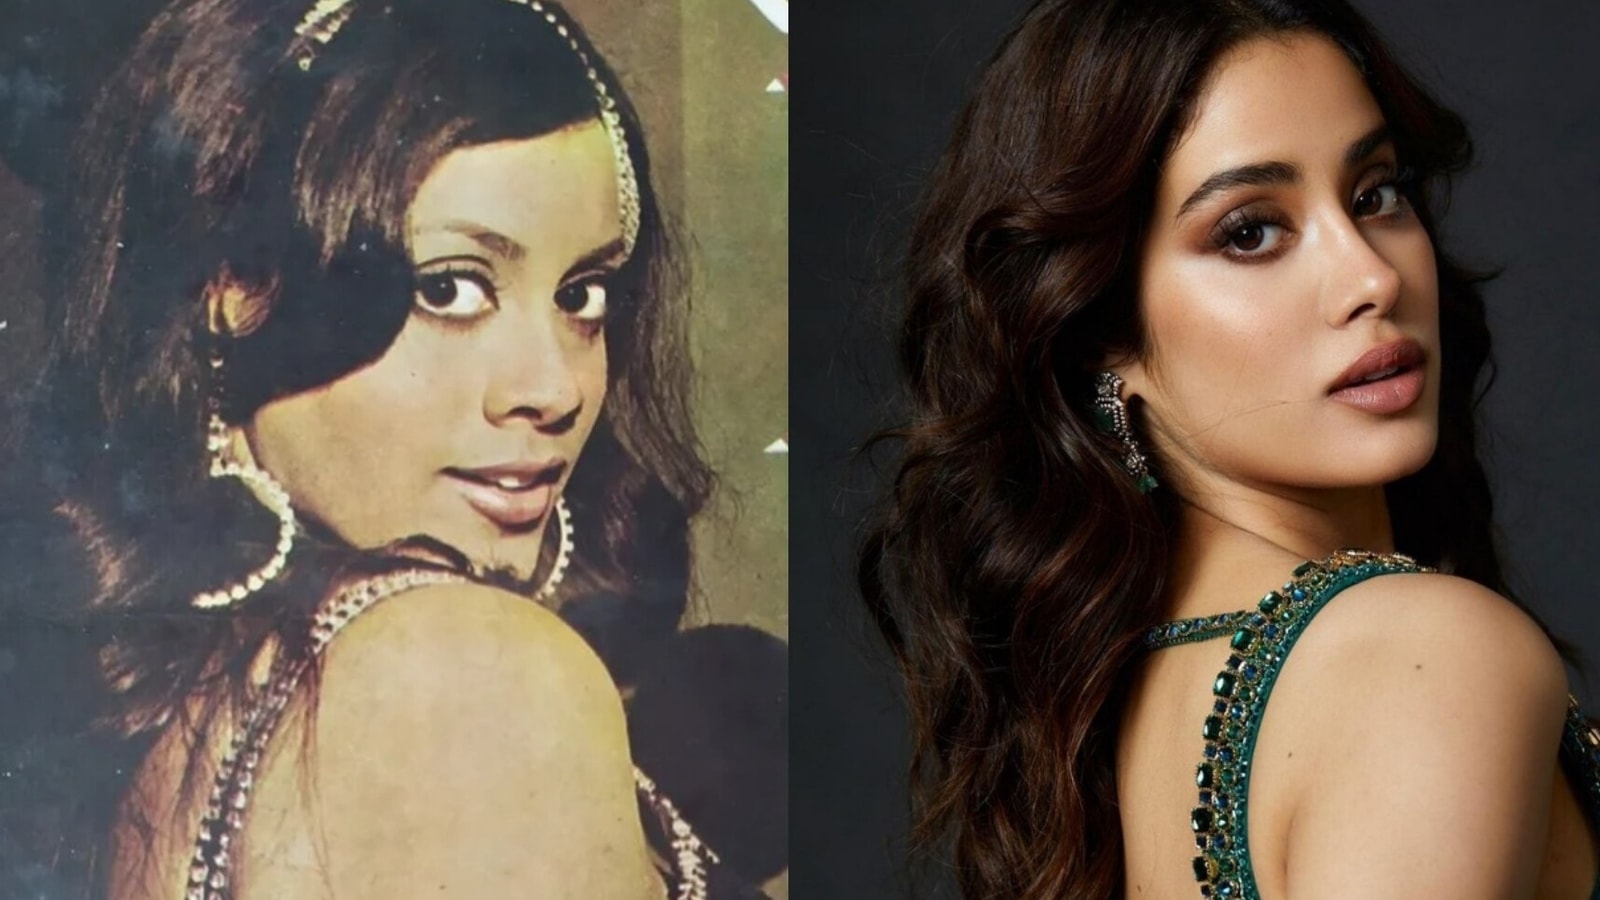 Reddit is convinced Janhvi Kapoor looks more like Prema Narayan than Sridevi: ‘They look exactly the same’